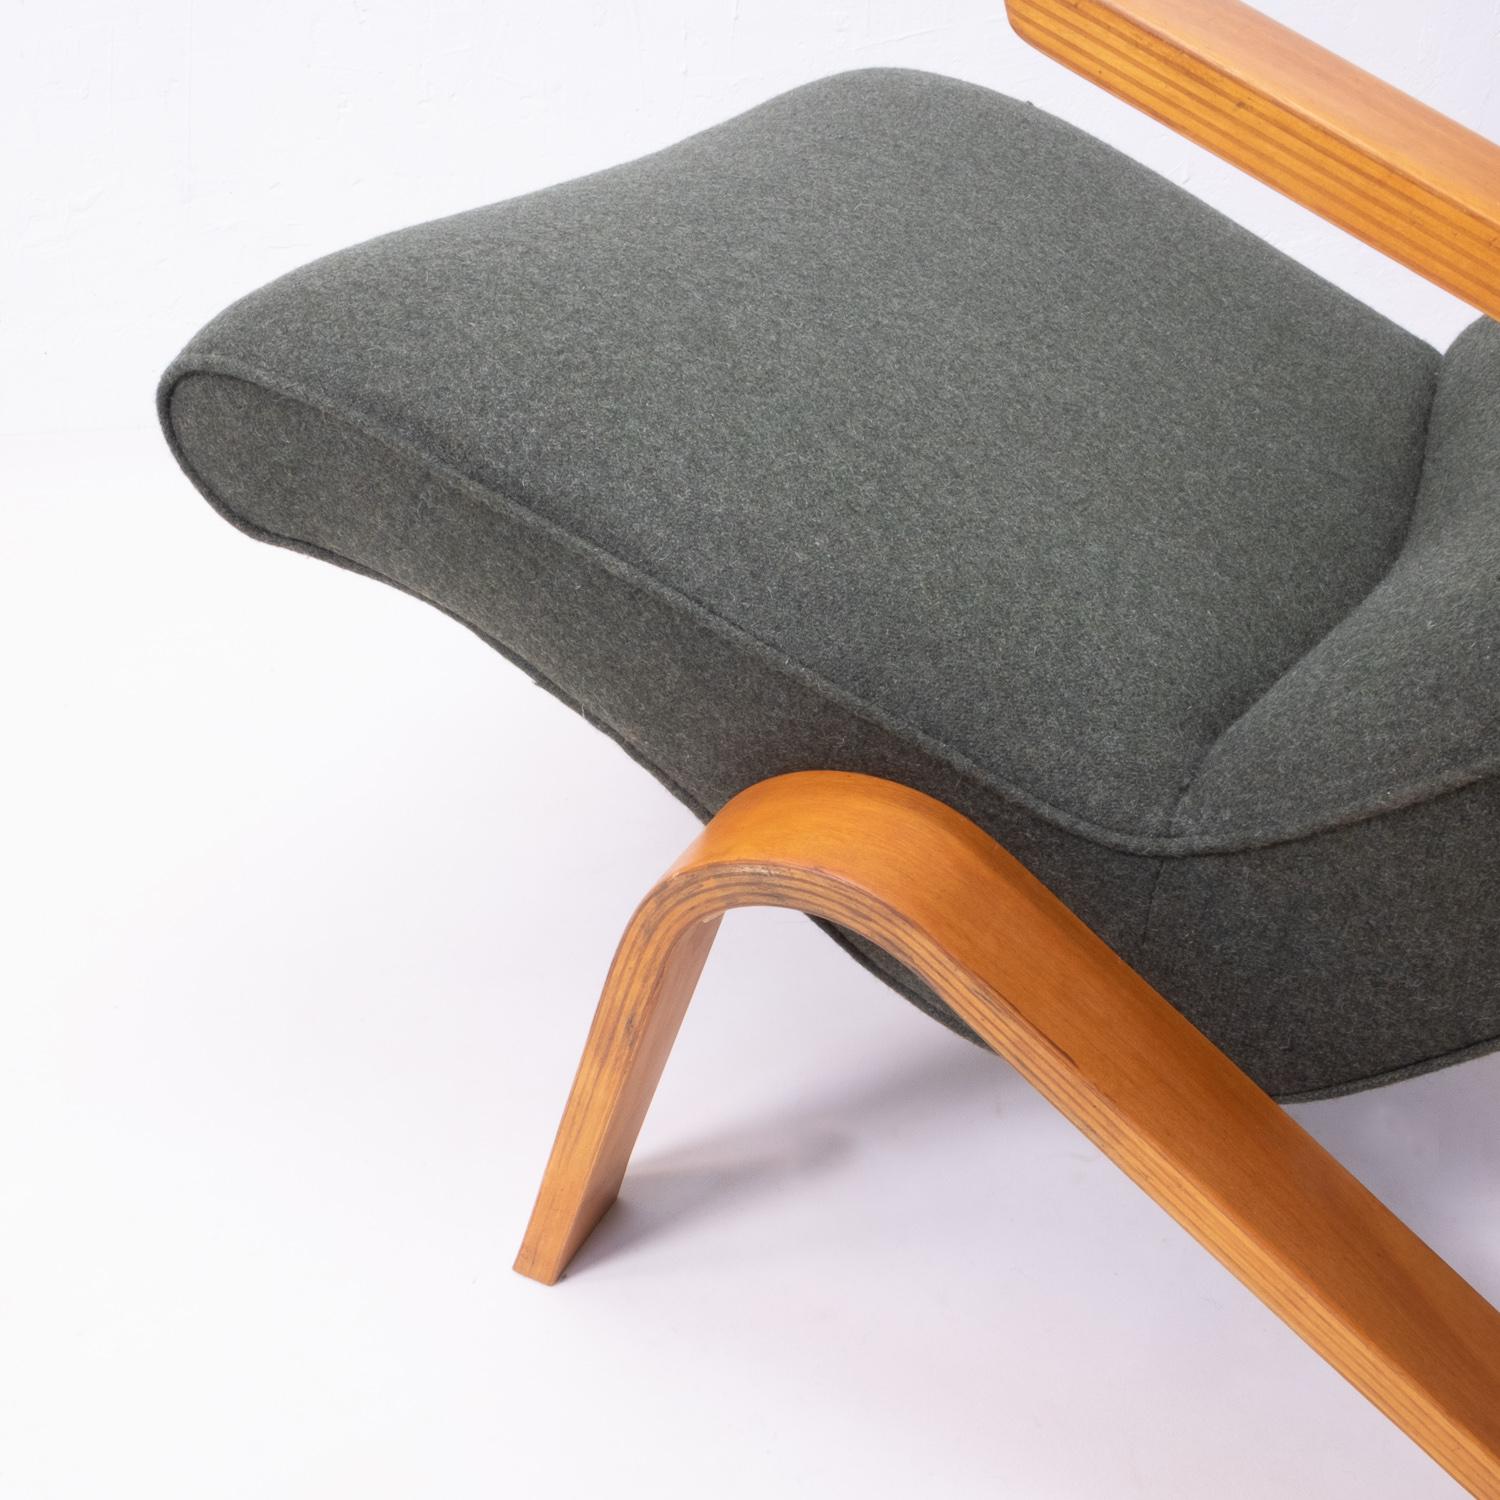 Grasshopper Chair by Eero Saarinen for Knoll

The Grasshopper (or model 61) chair was designed by Eero Saarinen for Knoll in 1946, it was actually the first chair designed for the Knoll company, and turned out as an immediate success.

Saarinen,